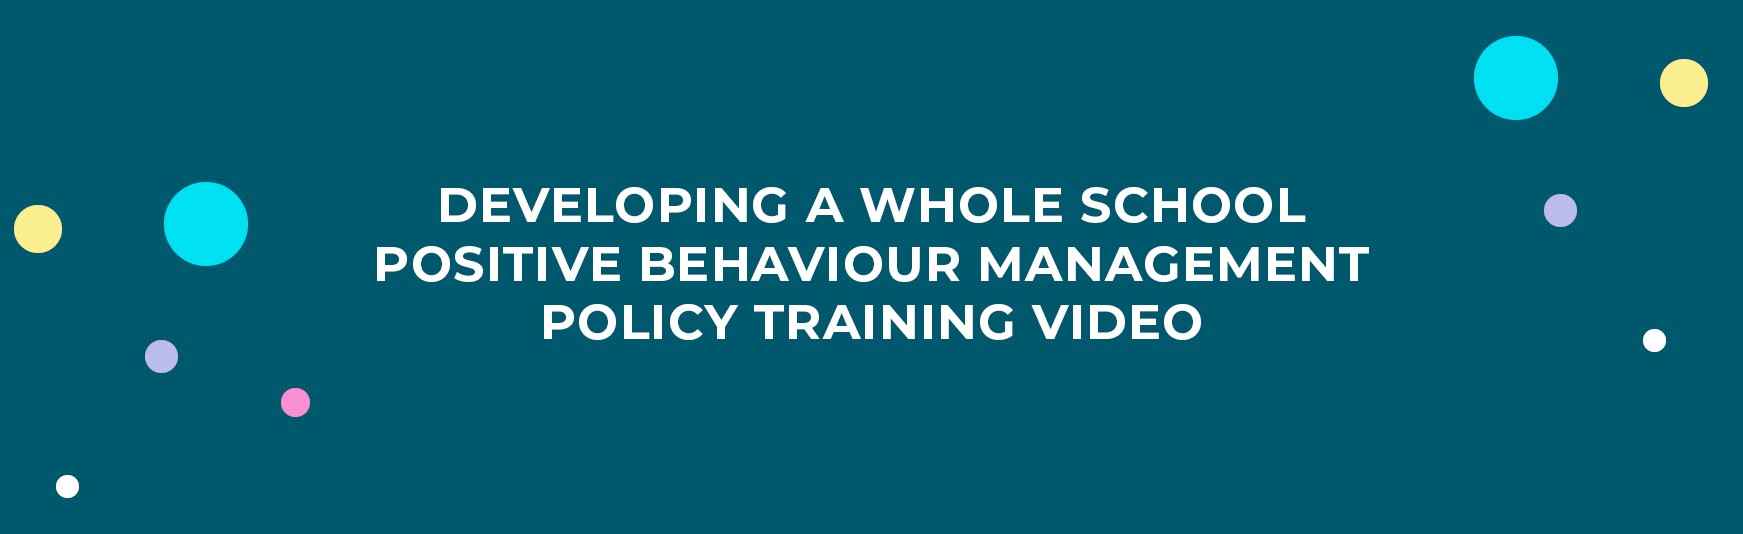 Developing a Whole School Positive Behaviour Management Policy Training Video